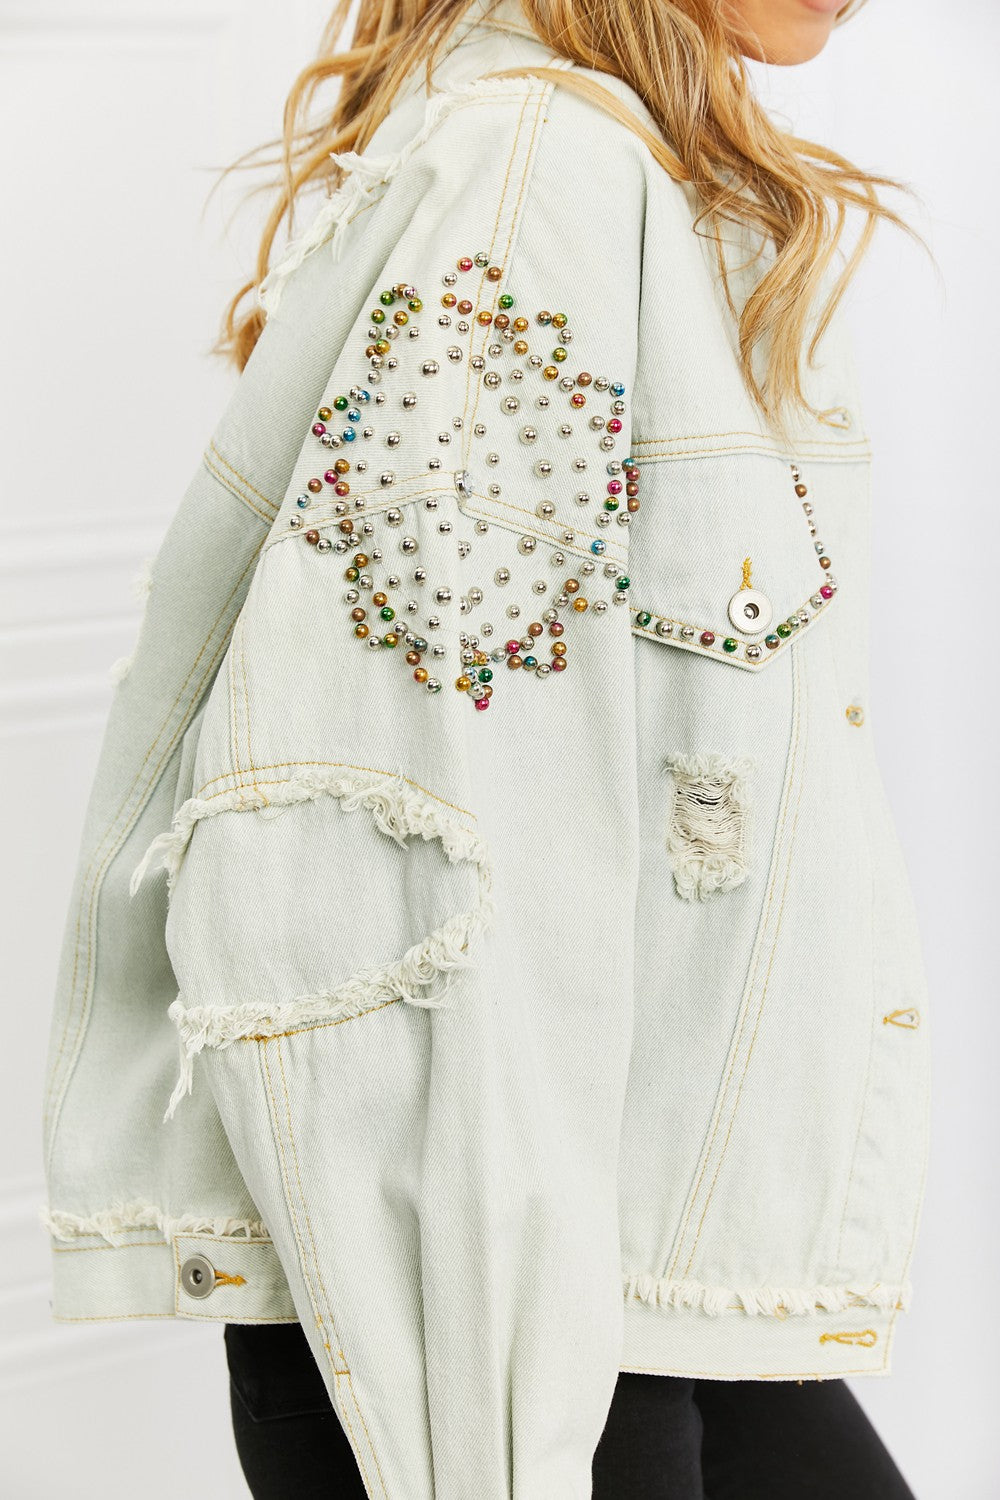 You will definitely turn head with this timeless denim jacket. This relaxed fit jacket features button front closures, distressed detailing and colorful pearl beaded details along the sleeves and front pockets. Pair with a dress or pants for an elevated casual look.